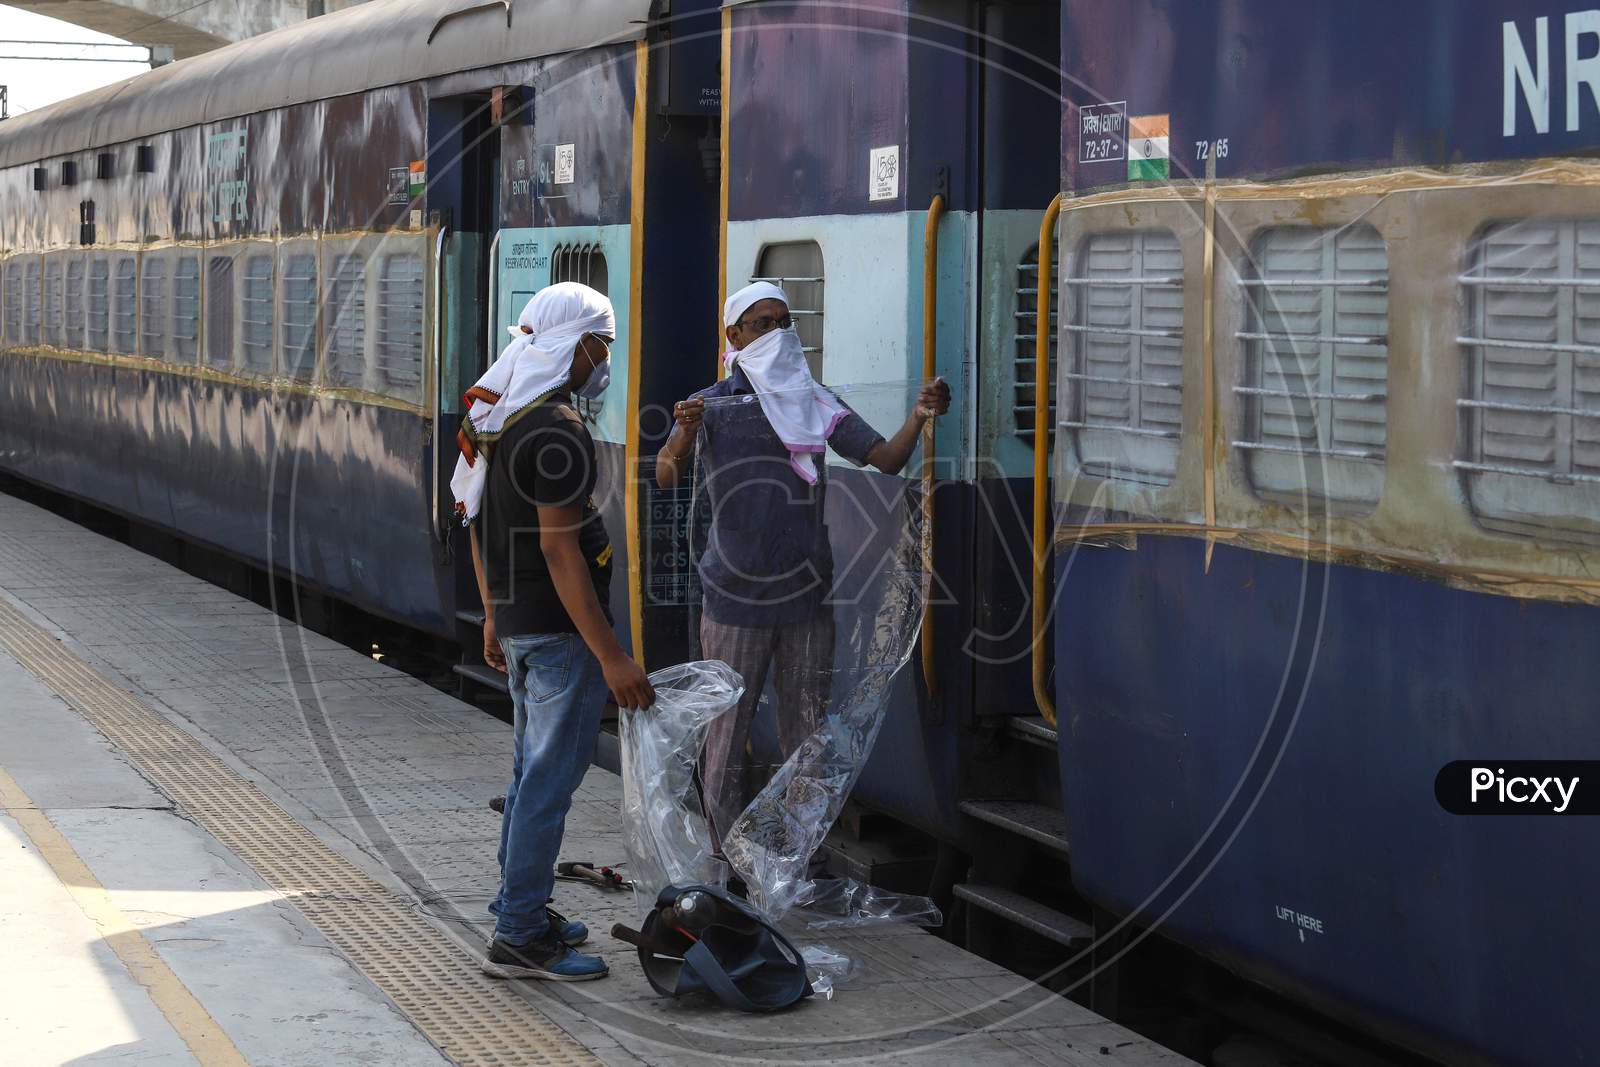 A Worker Fixes A Plastic Partition In A Train Coach That Has Been Converted Into An Isolation Ward For Coronavirus Patients At Anand Vihar Railway Station On June 17, 2020 In New Delhi, India.